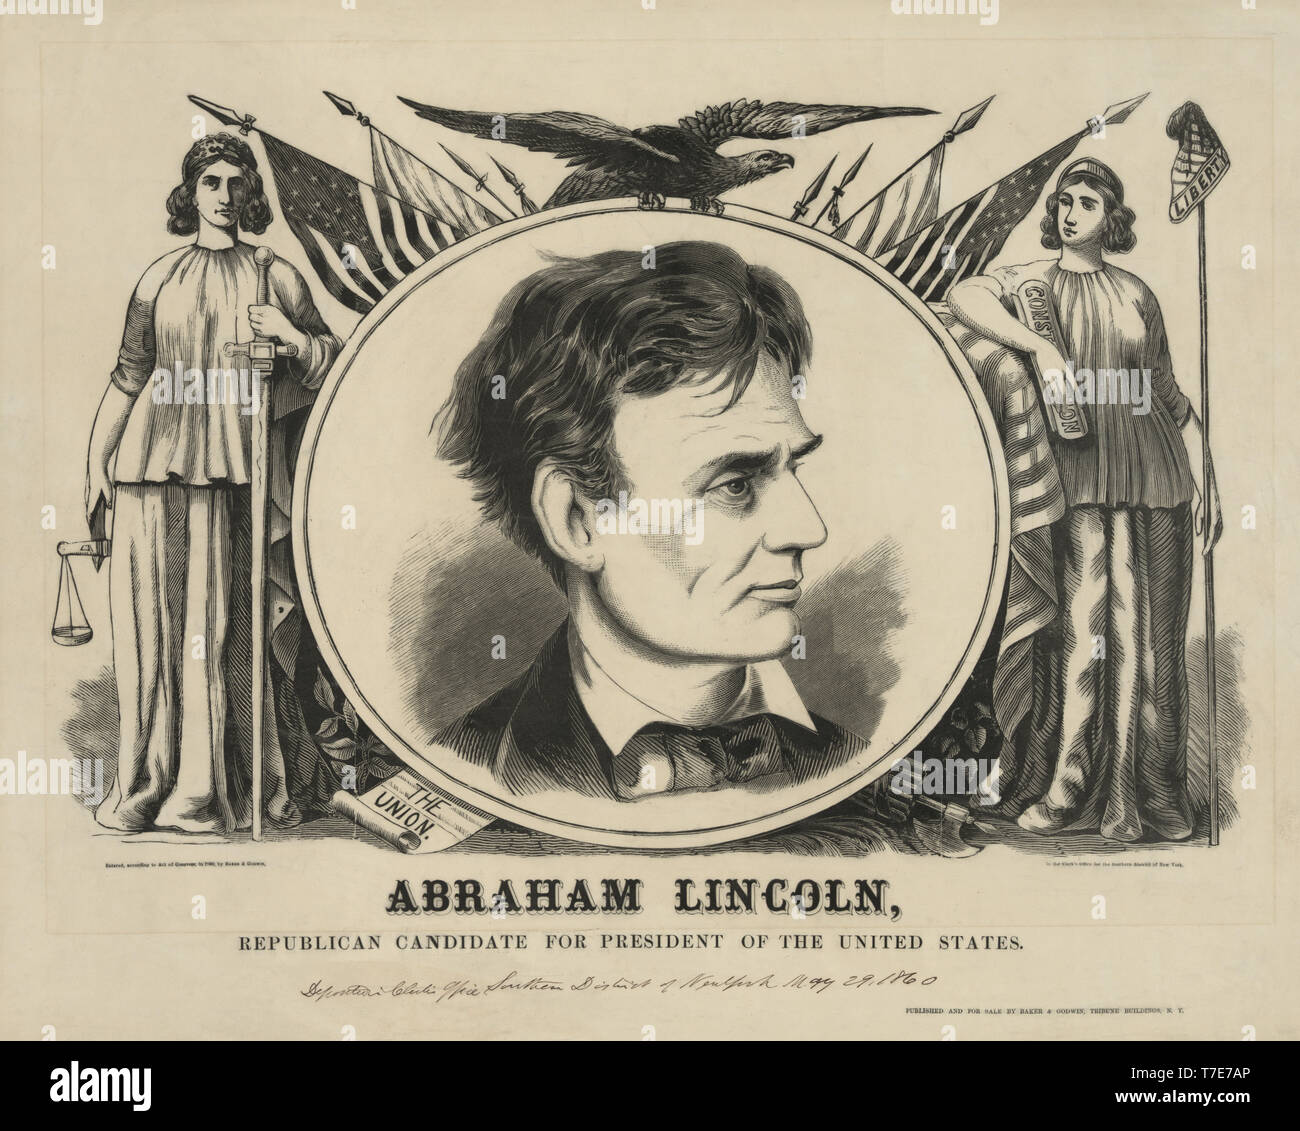 Abraham Lincoln, Republican Candidate for the President of the United States, Campaign Banner, Published by Baker & Godwin, 1860 Stock Photo